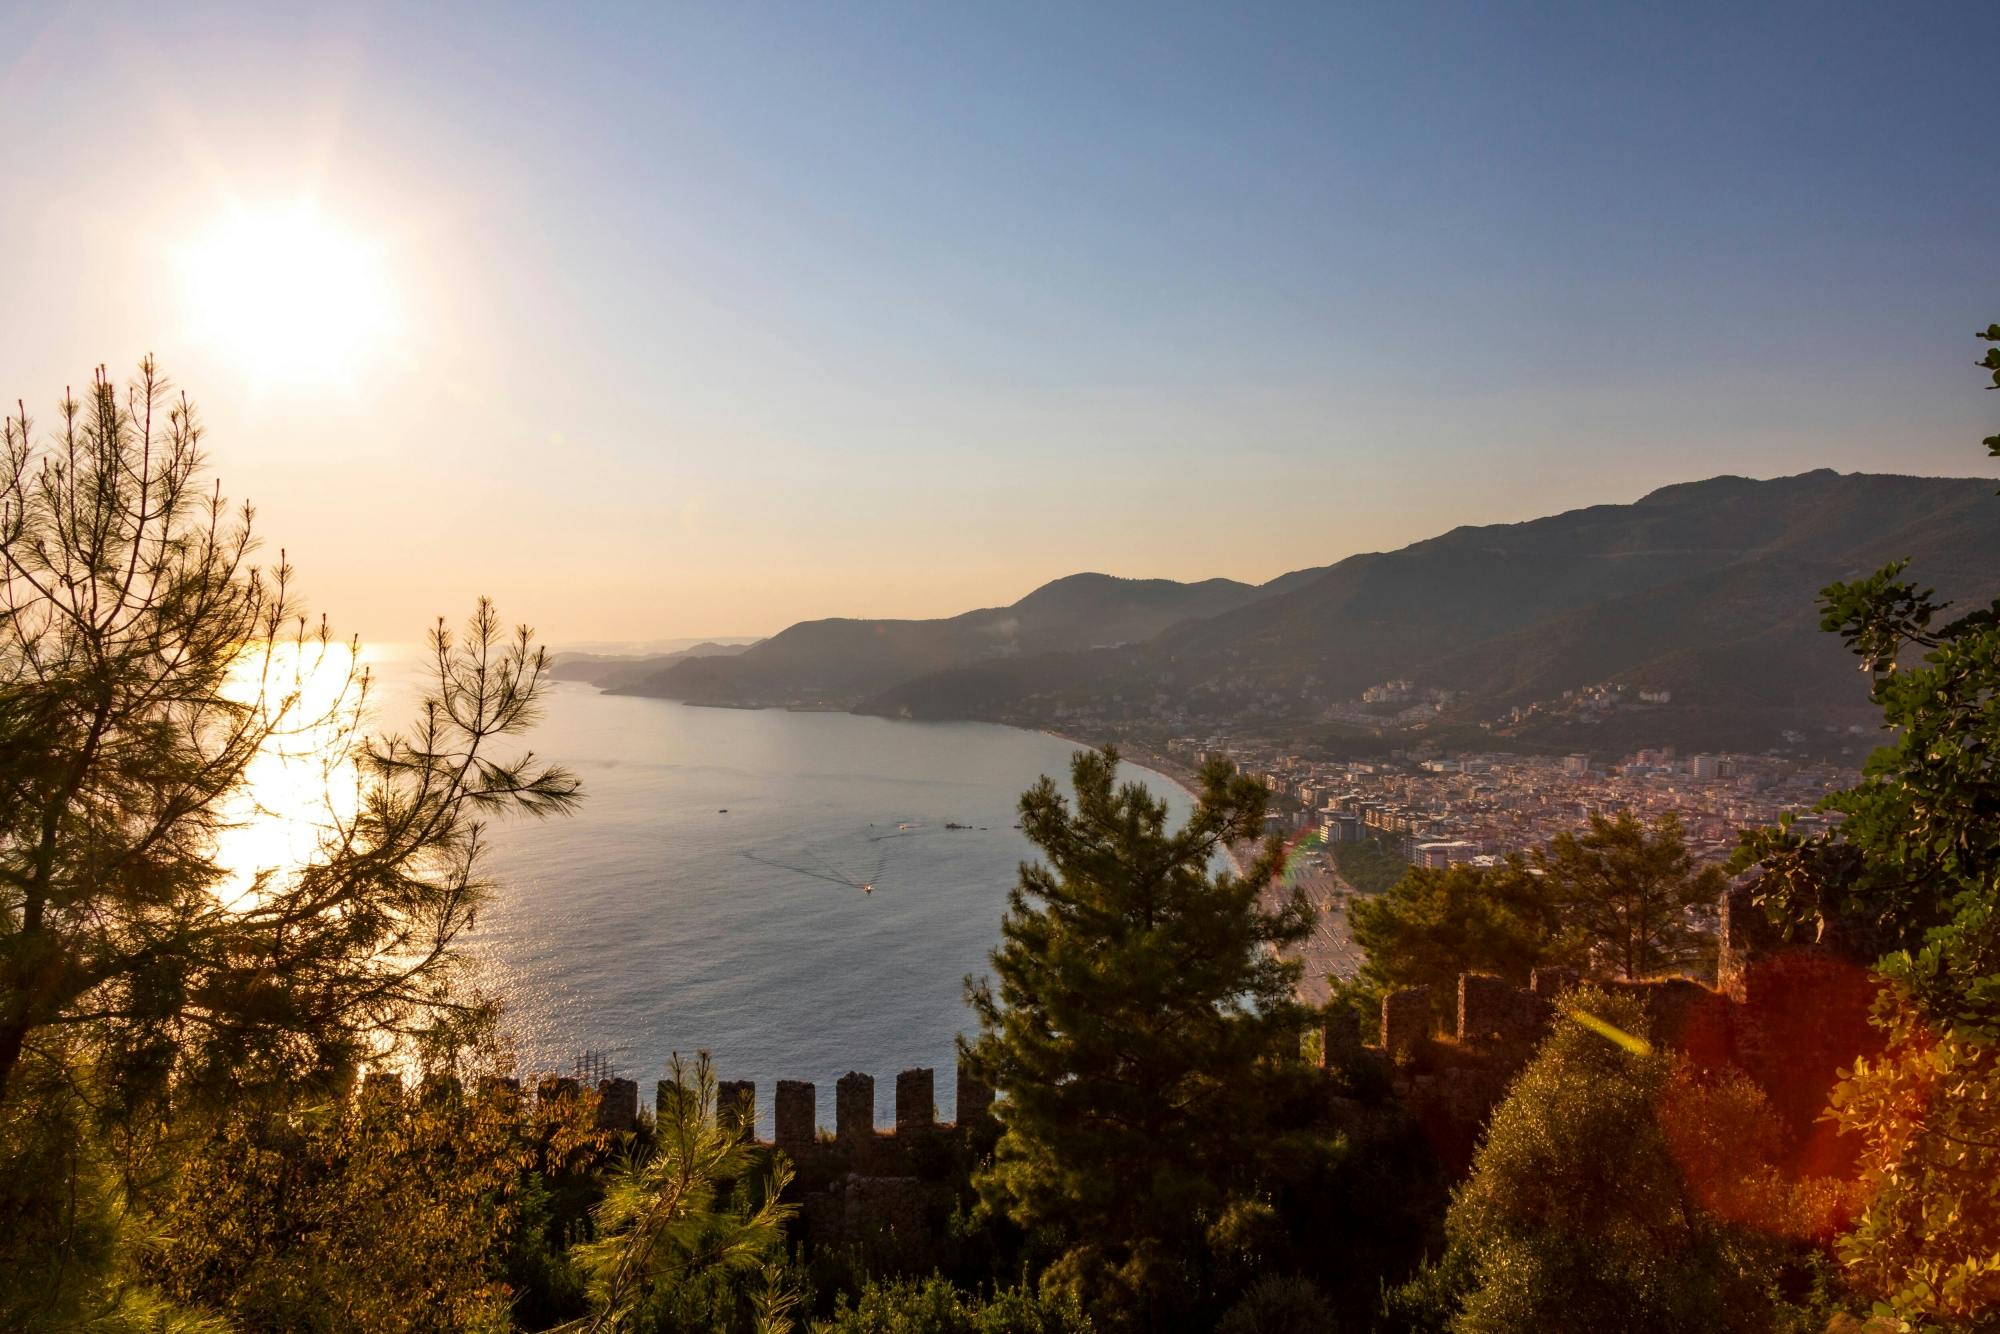 Alanya Evening Off-road Tour with Cable Car and Turkish Dinner